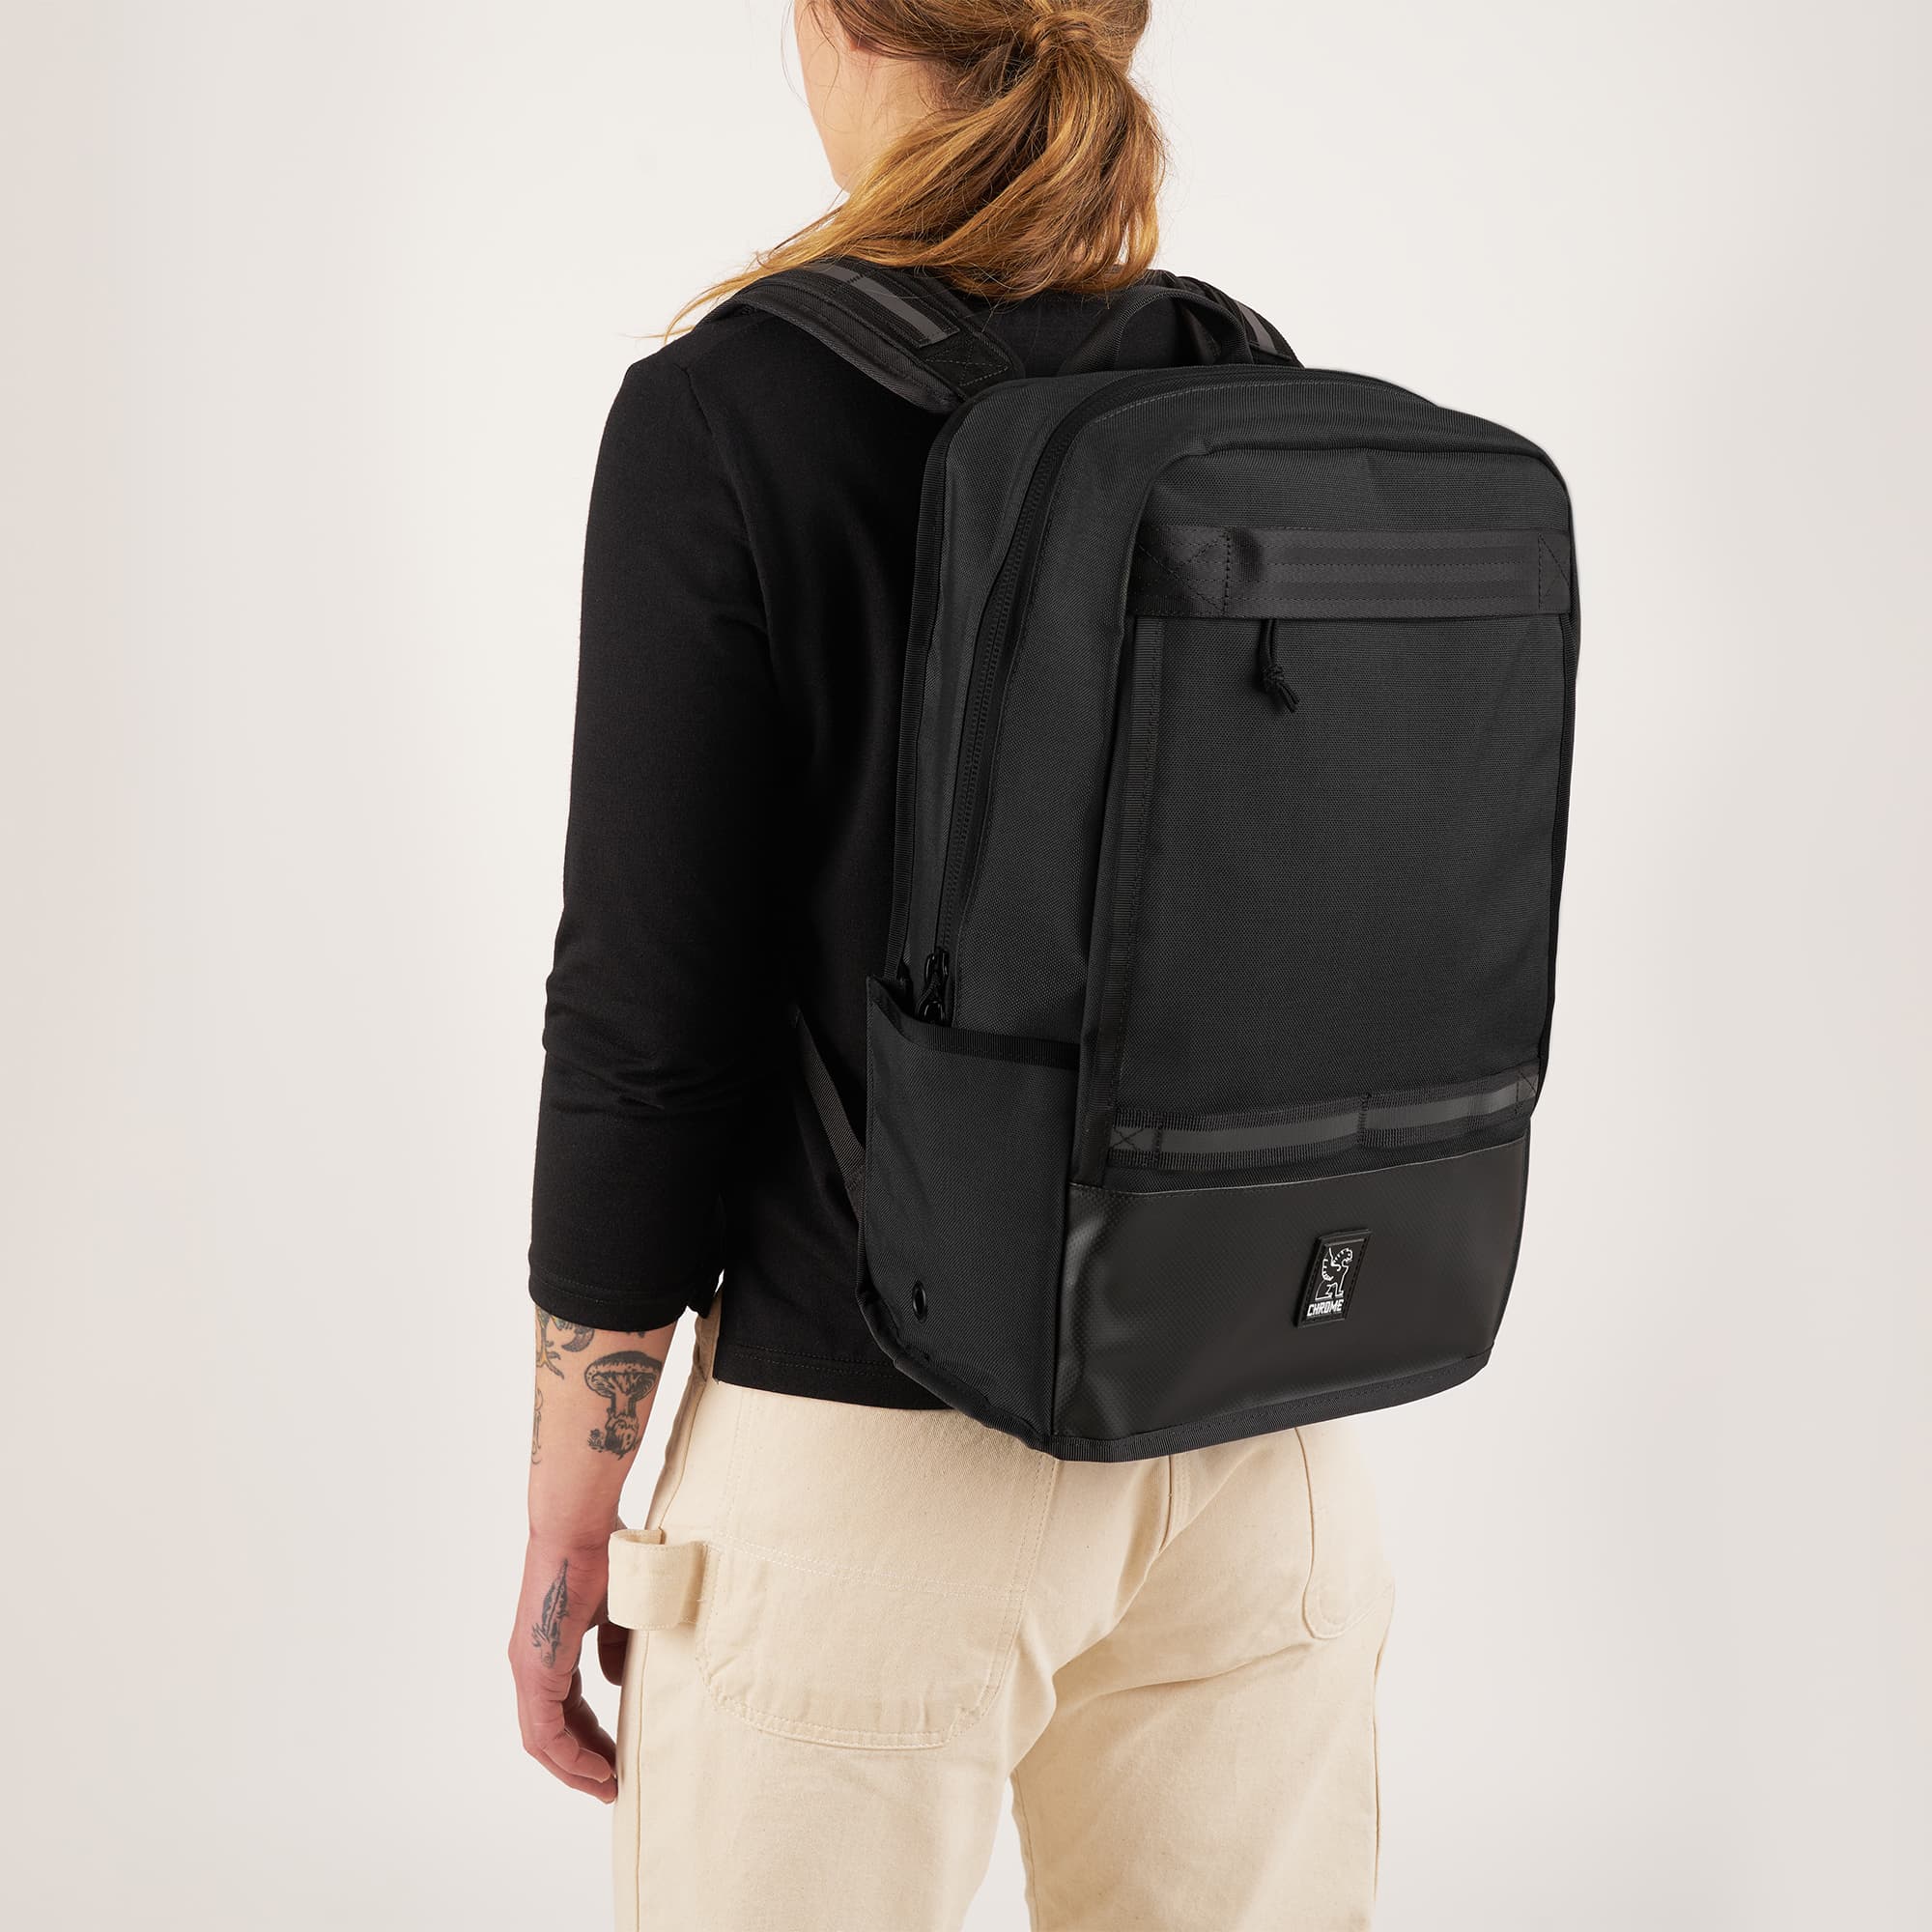 Hondo Daypack in black worn by a woman 